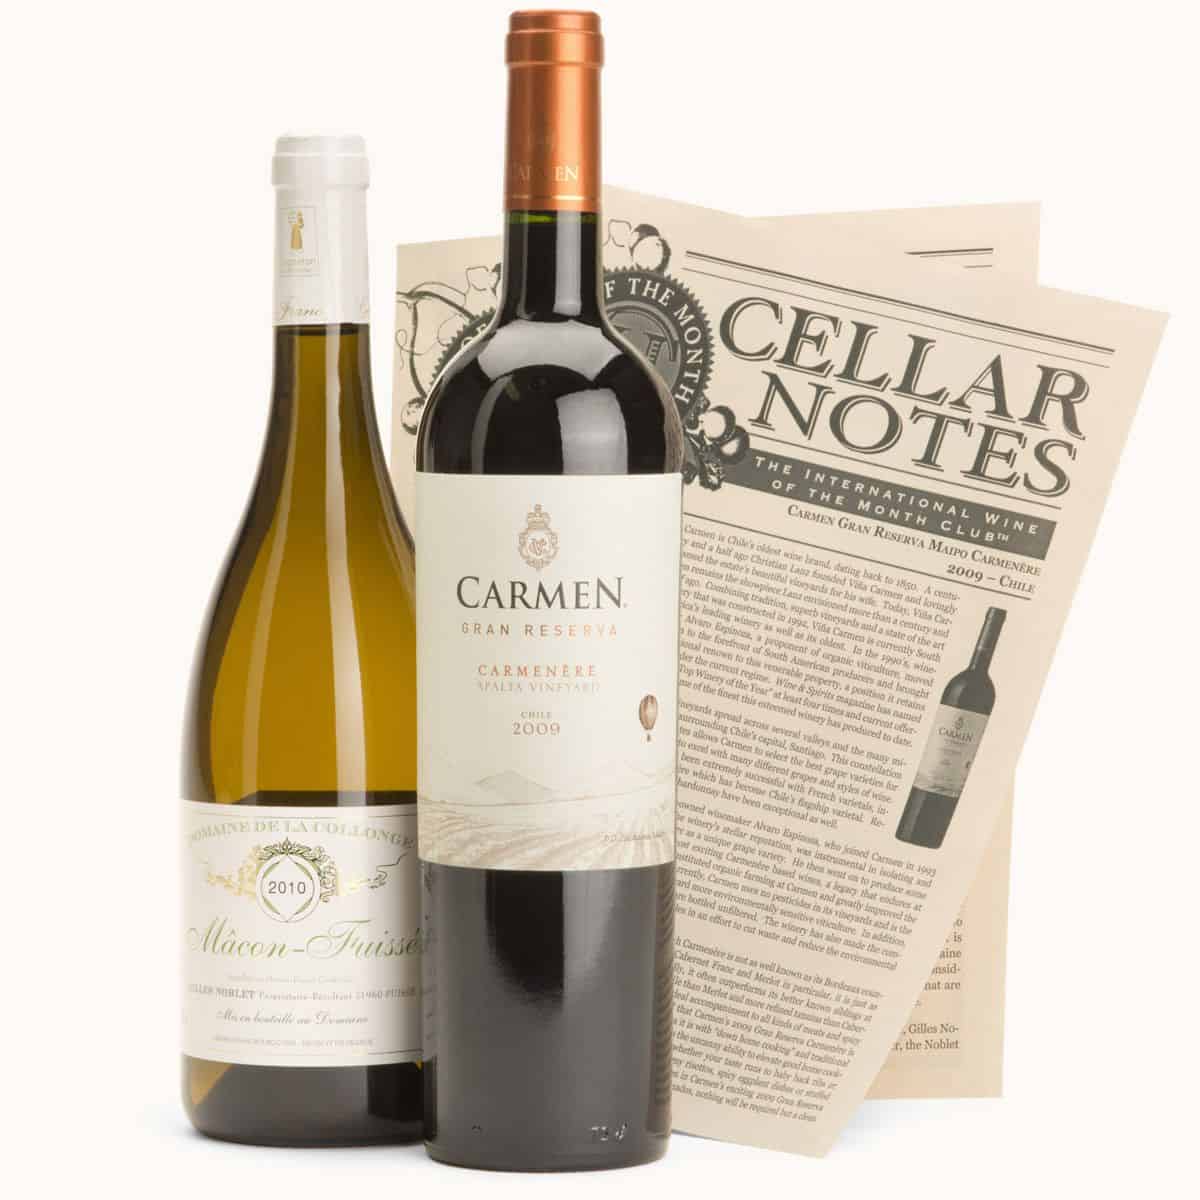 International Wine Club of the Month Reviews: Get All The Details At ...